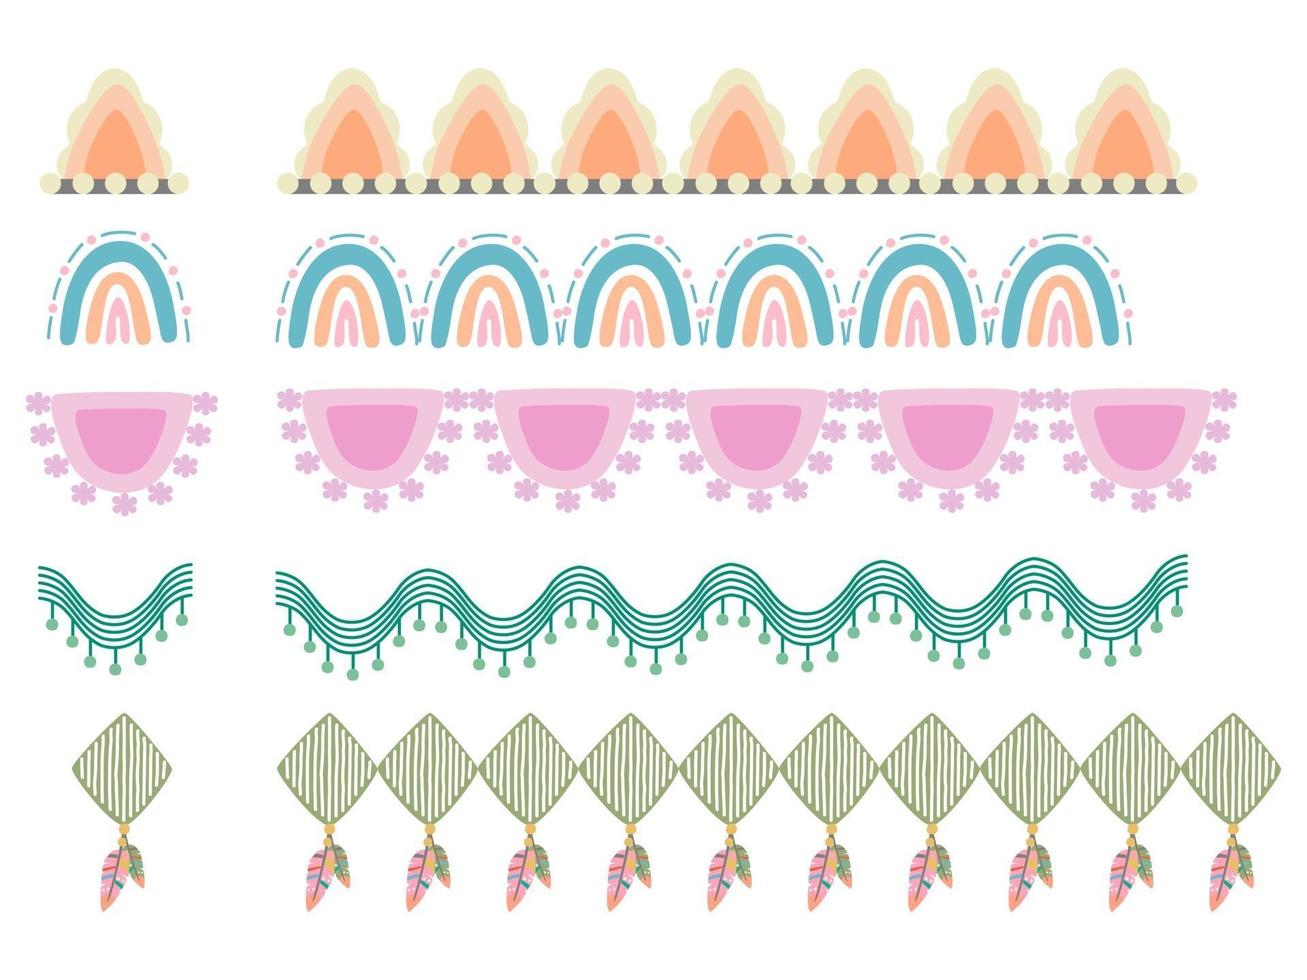 A collection of colorful boho style patterns vector